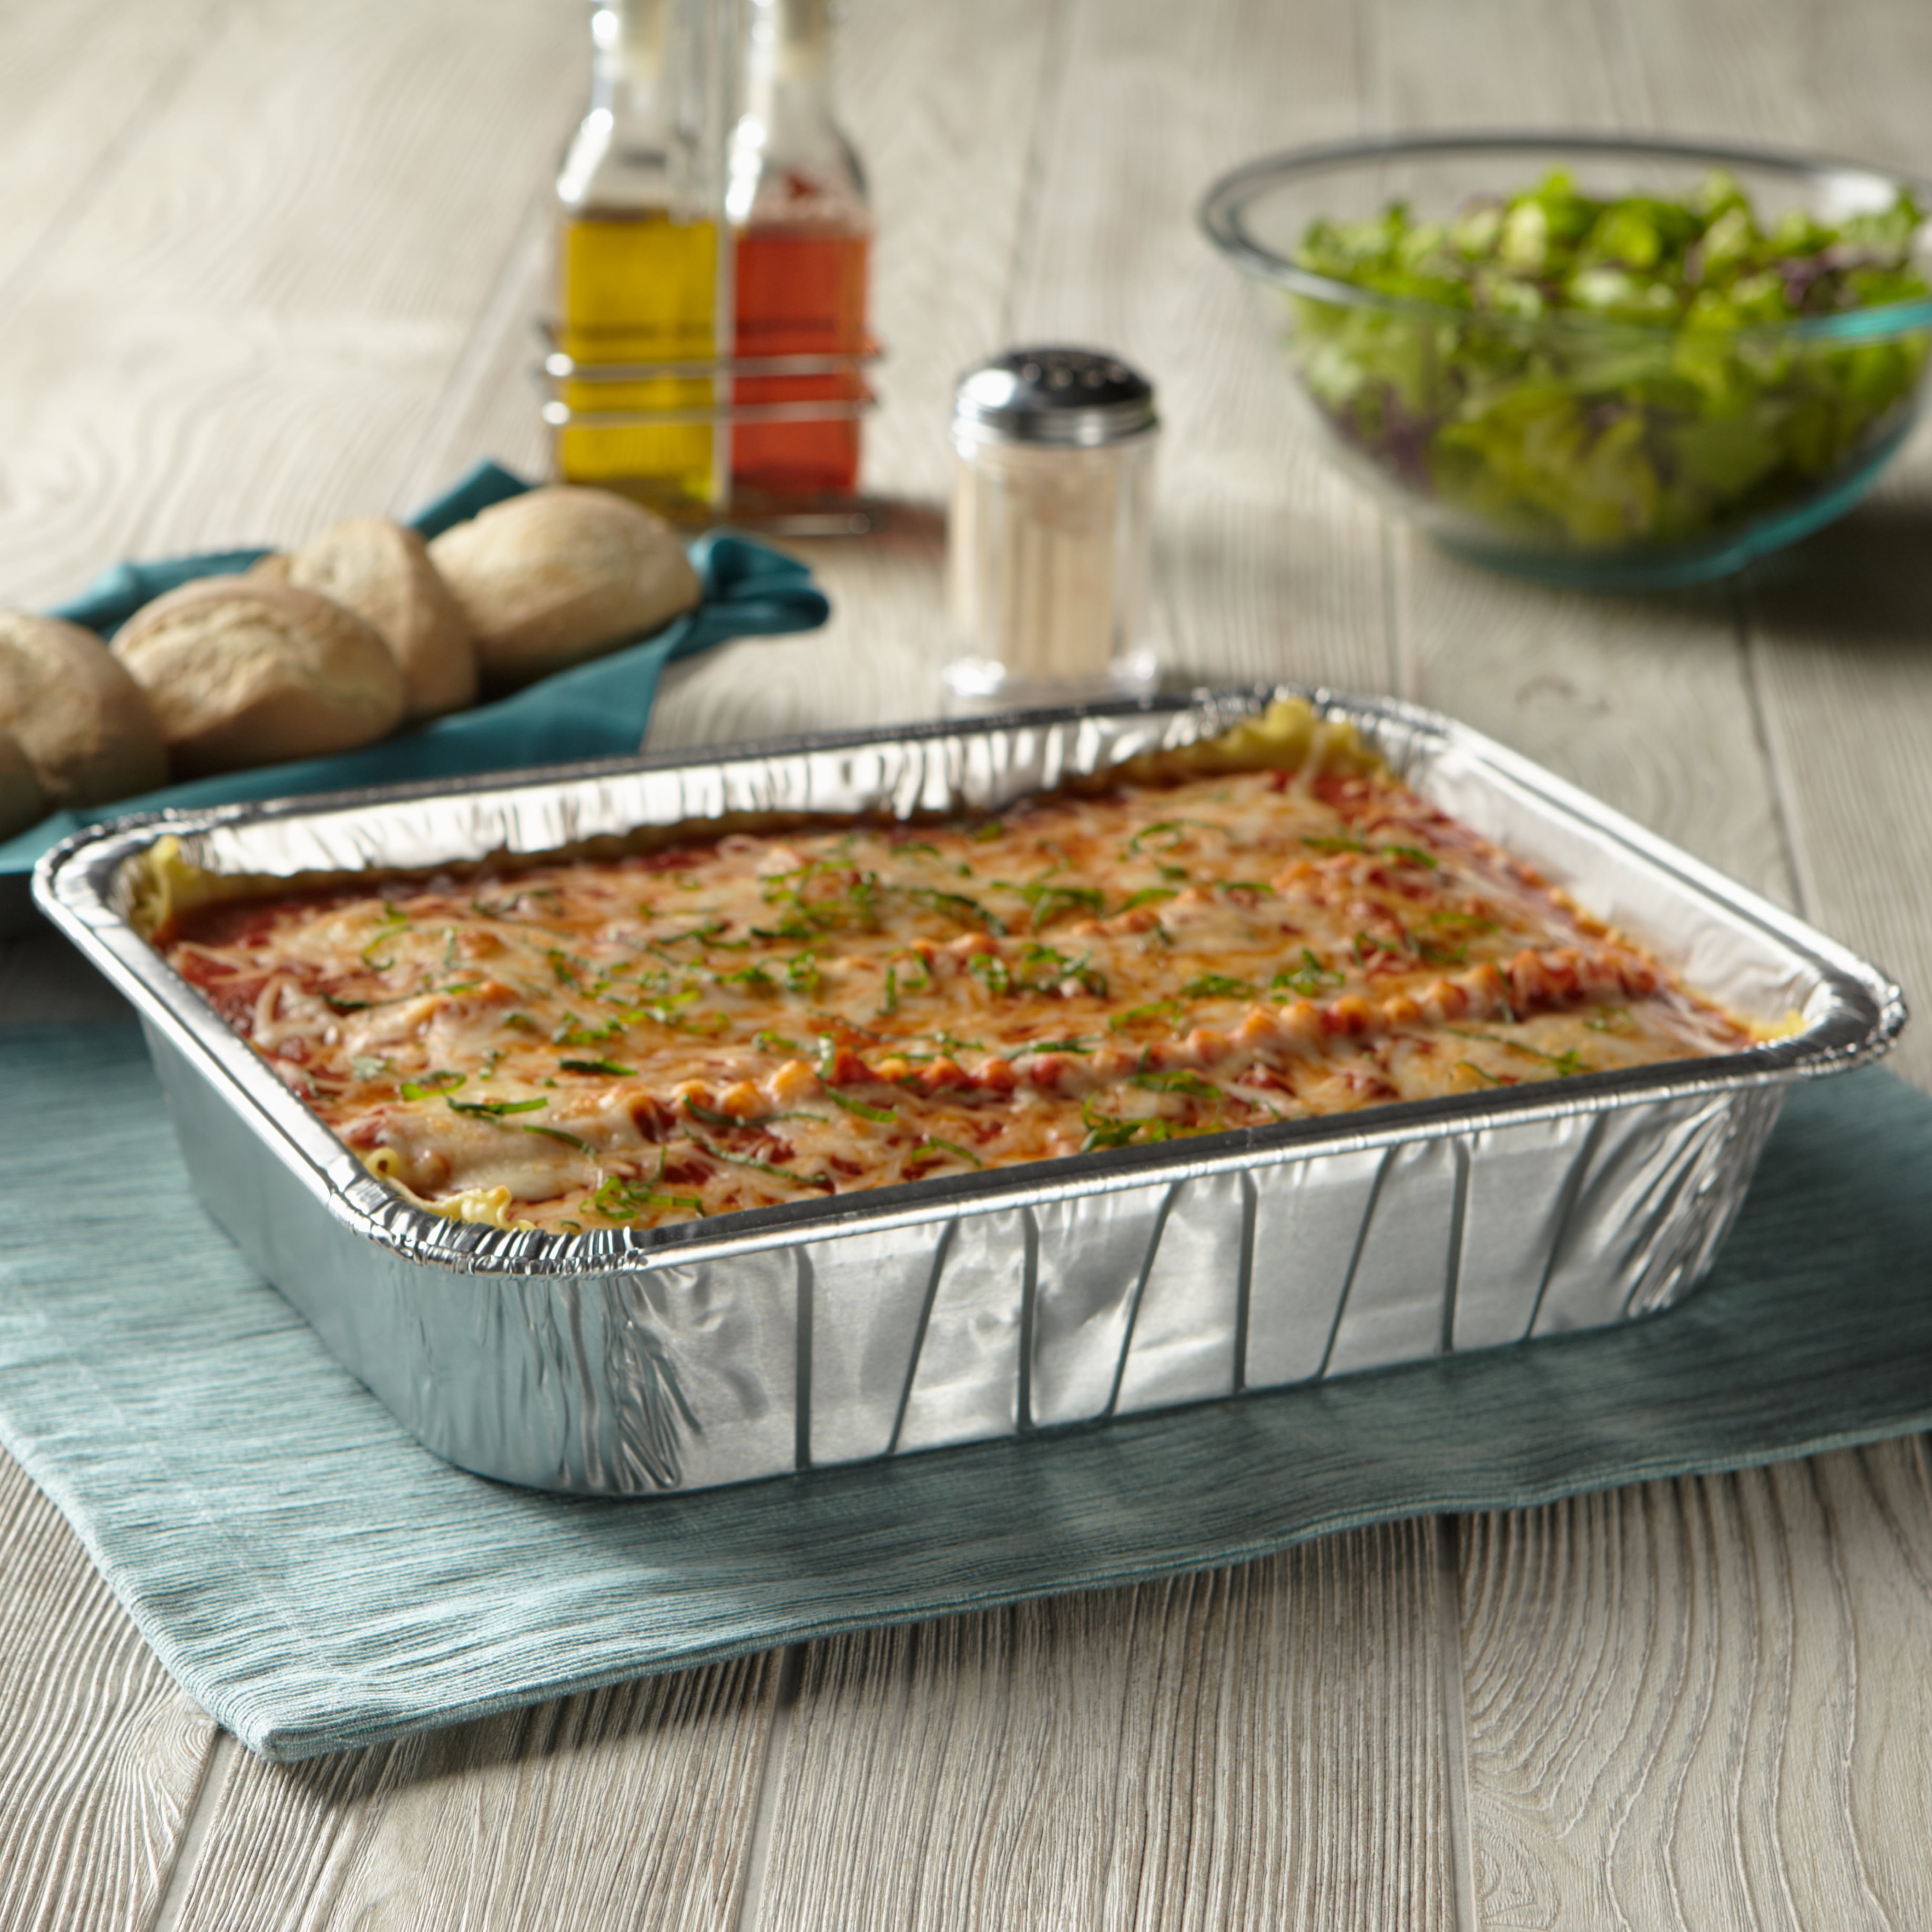 TBUY Rose Aluminum Trays with Lids 9x13 for Serving Food Turkey Catering Disposable Aluminum Foil Pans for Baking Cakes, Bread, Meatloaf, Lasagna, 30